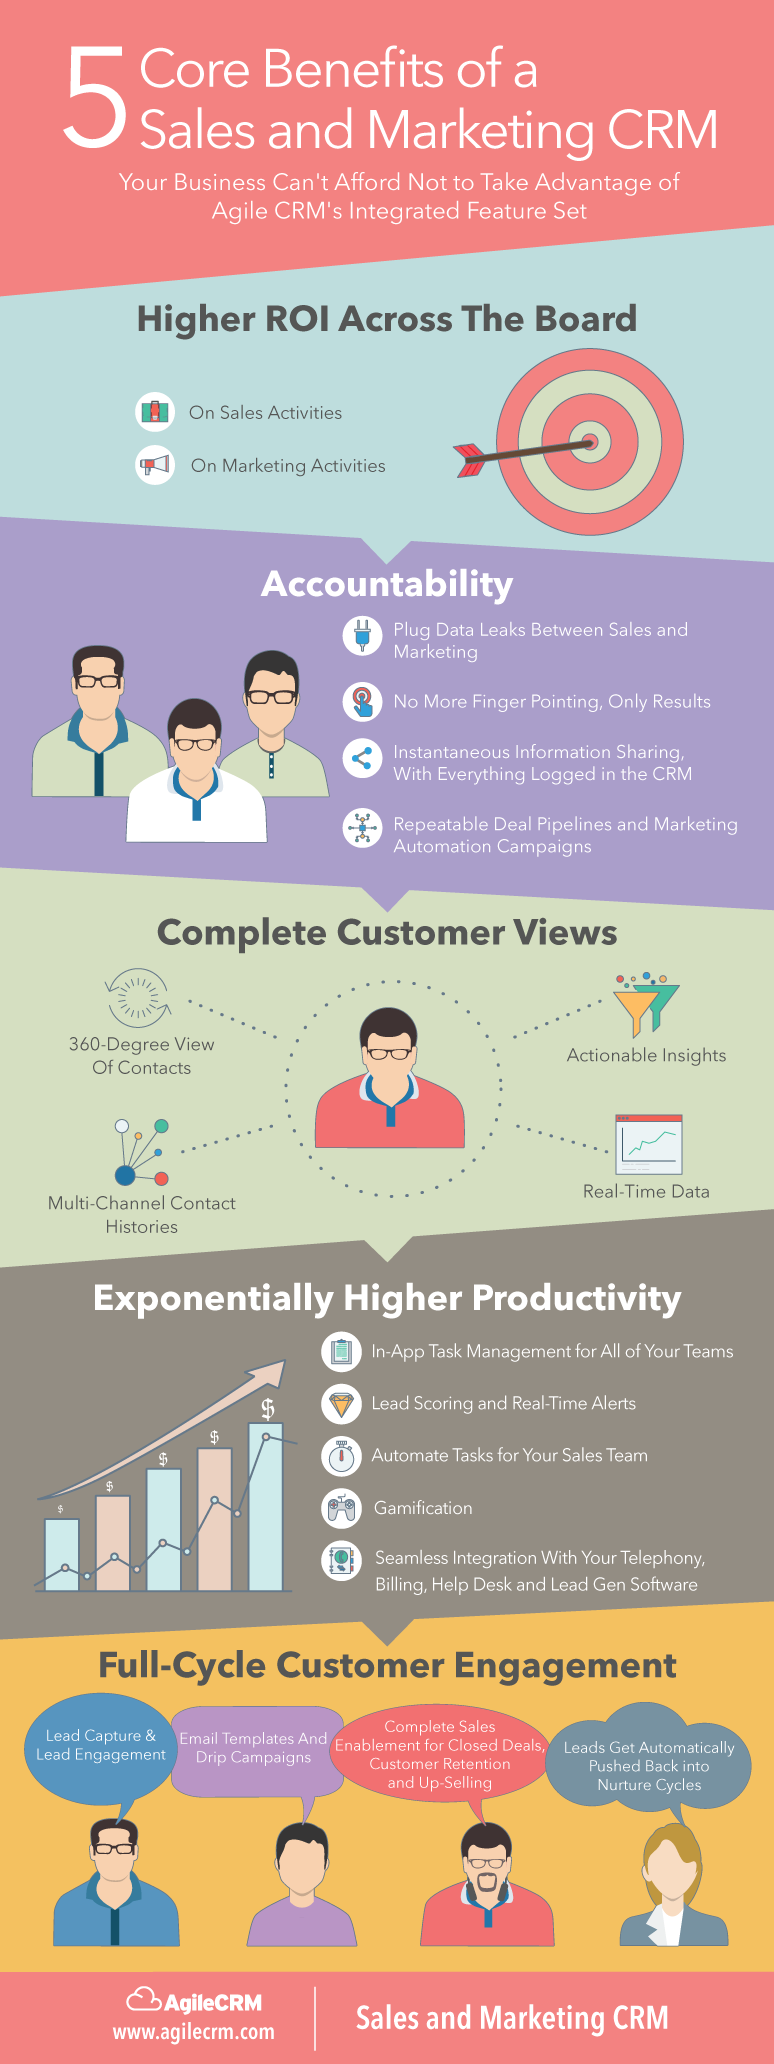 5 Core Benefits of a Sales and Marketing CRM